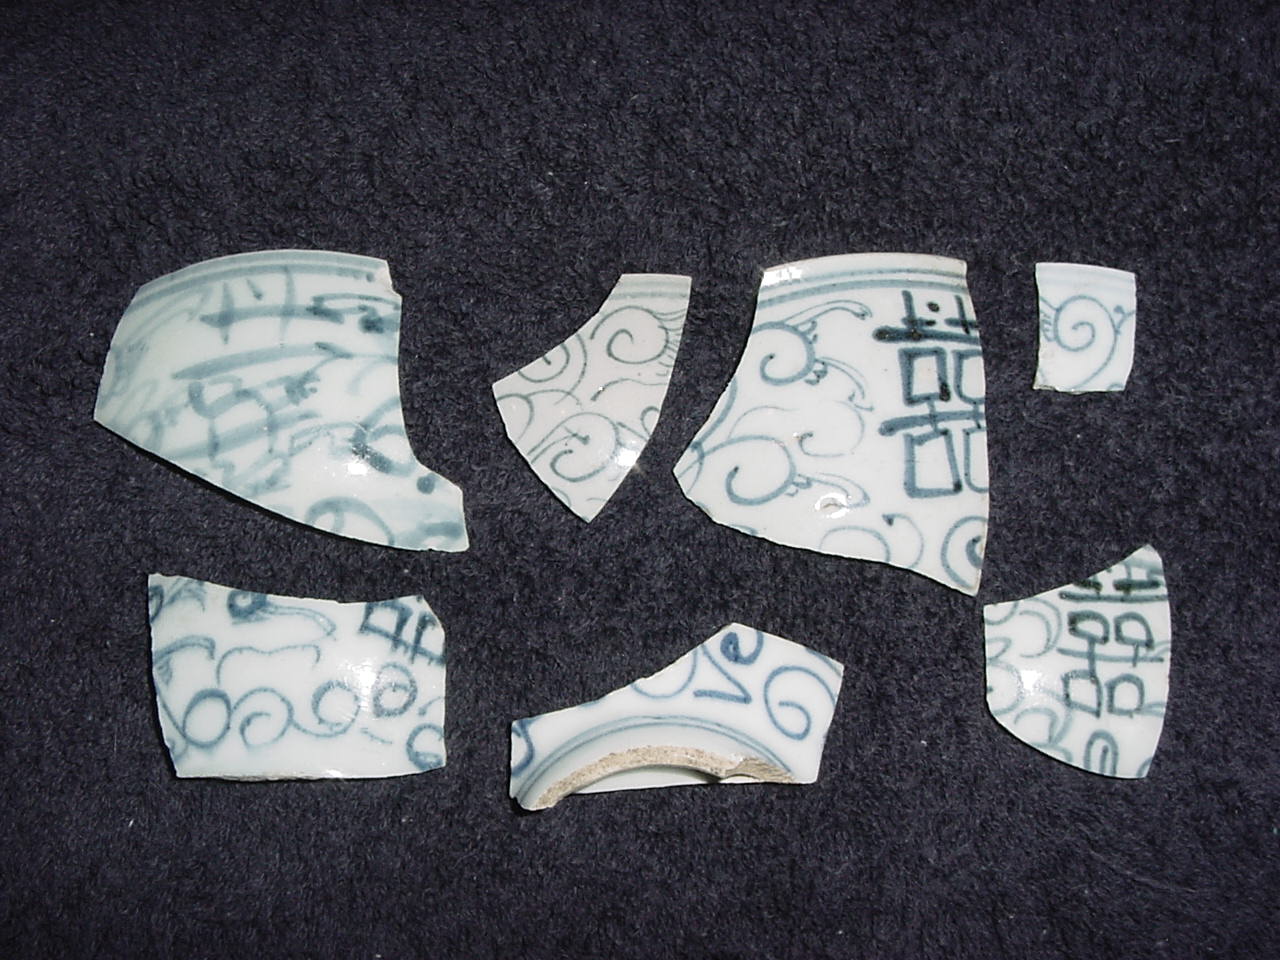 Double Happiness
              rice bowl fragments